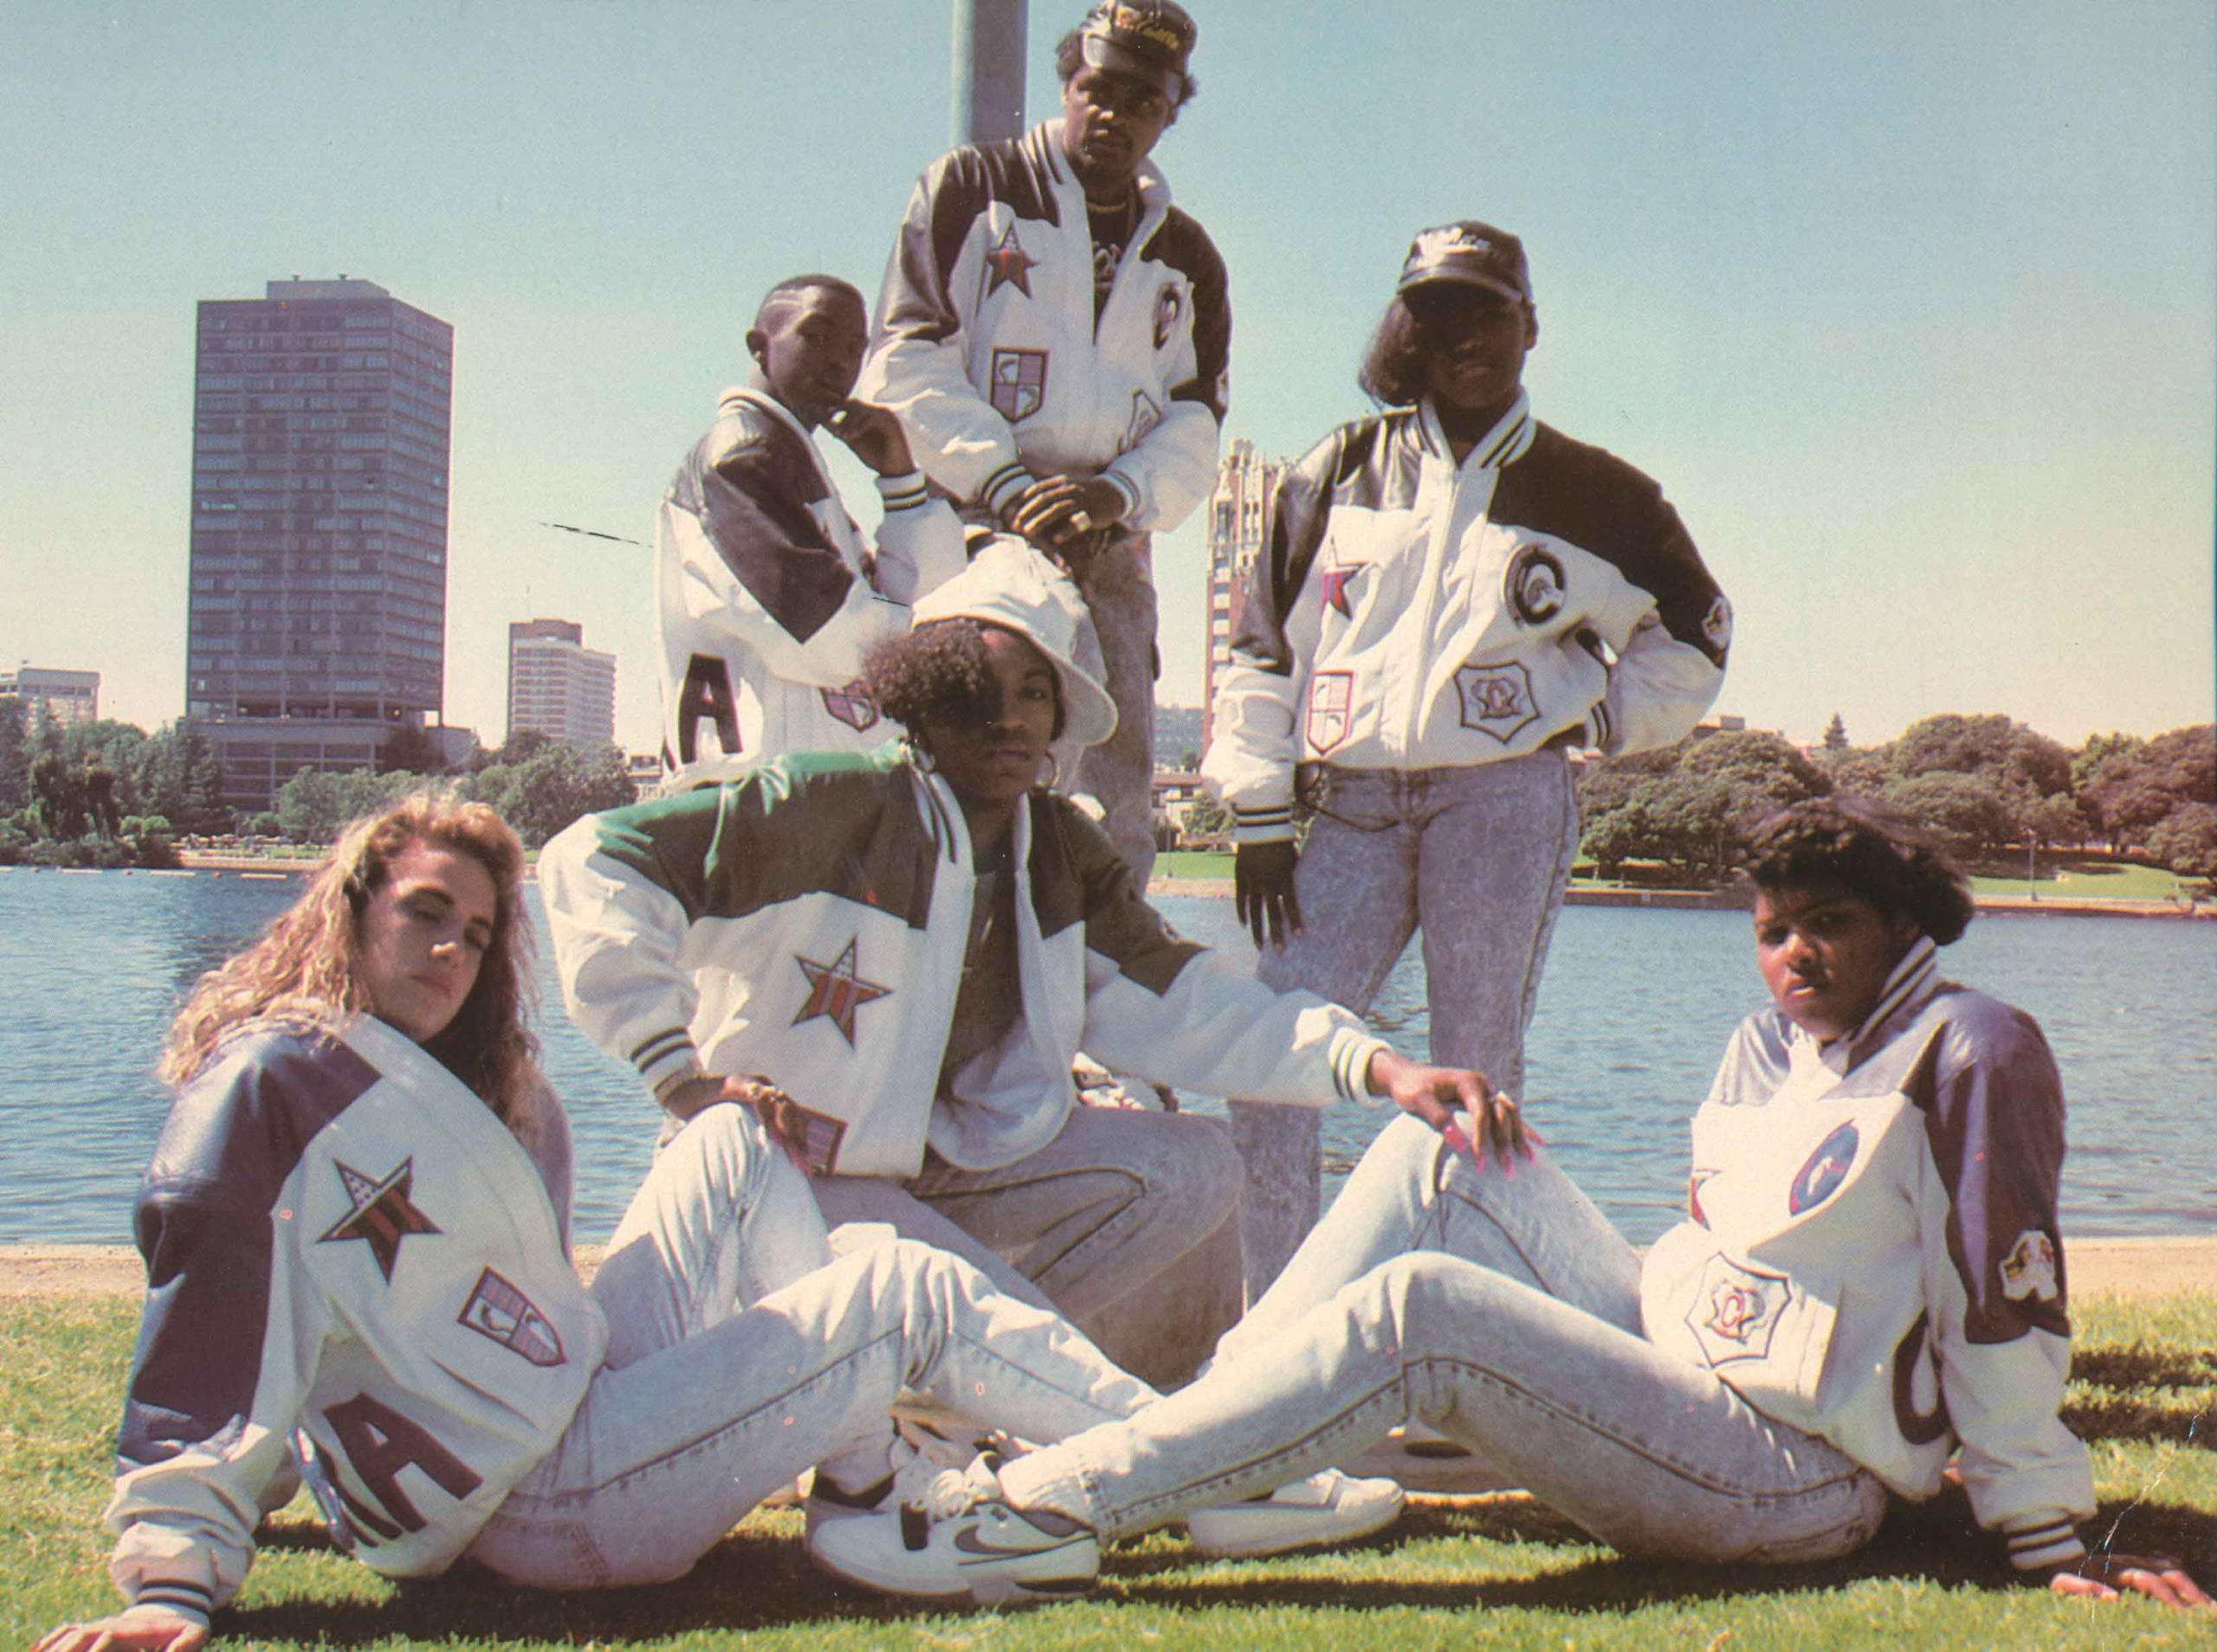 A group of Black teenagers in large jackets and faded jeans pose in front of a lake.